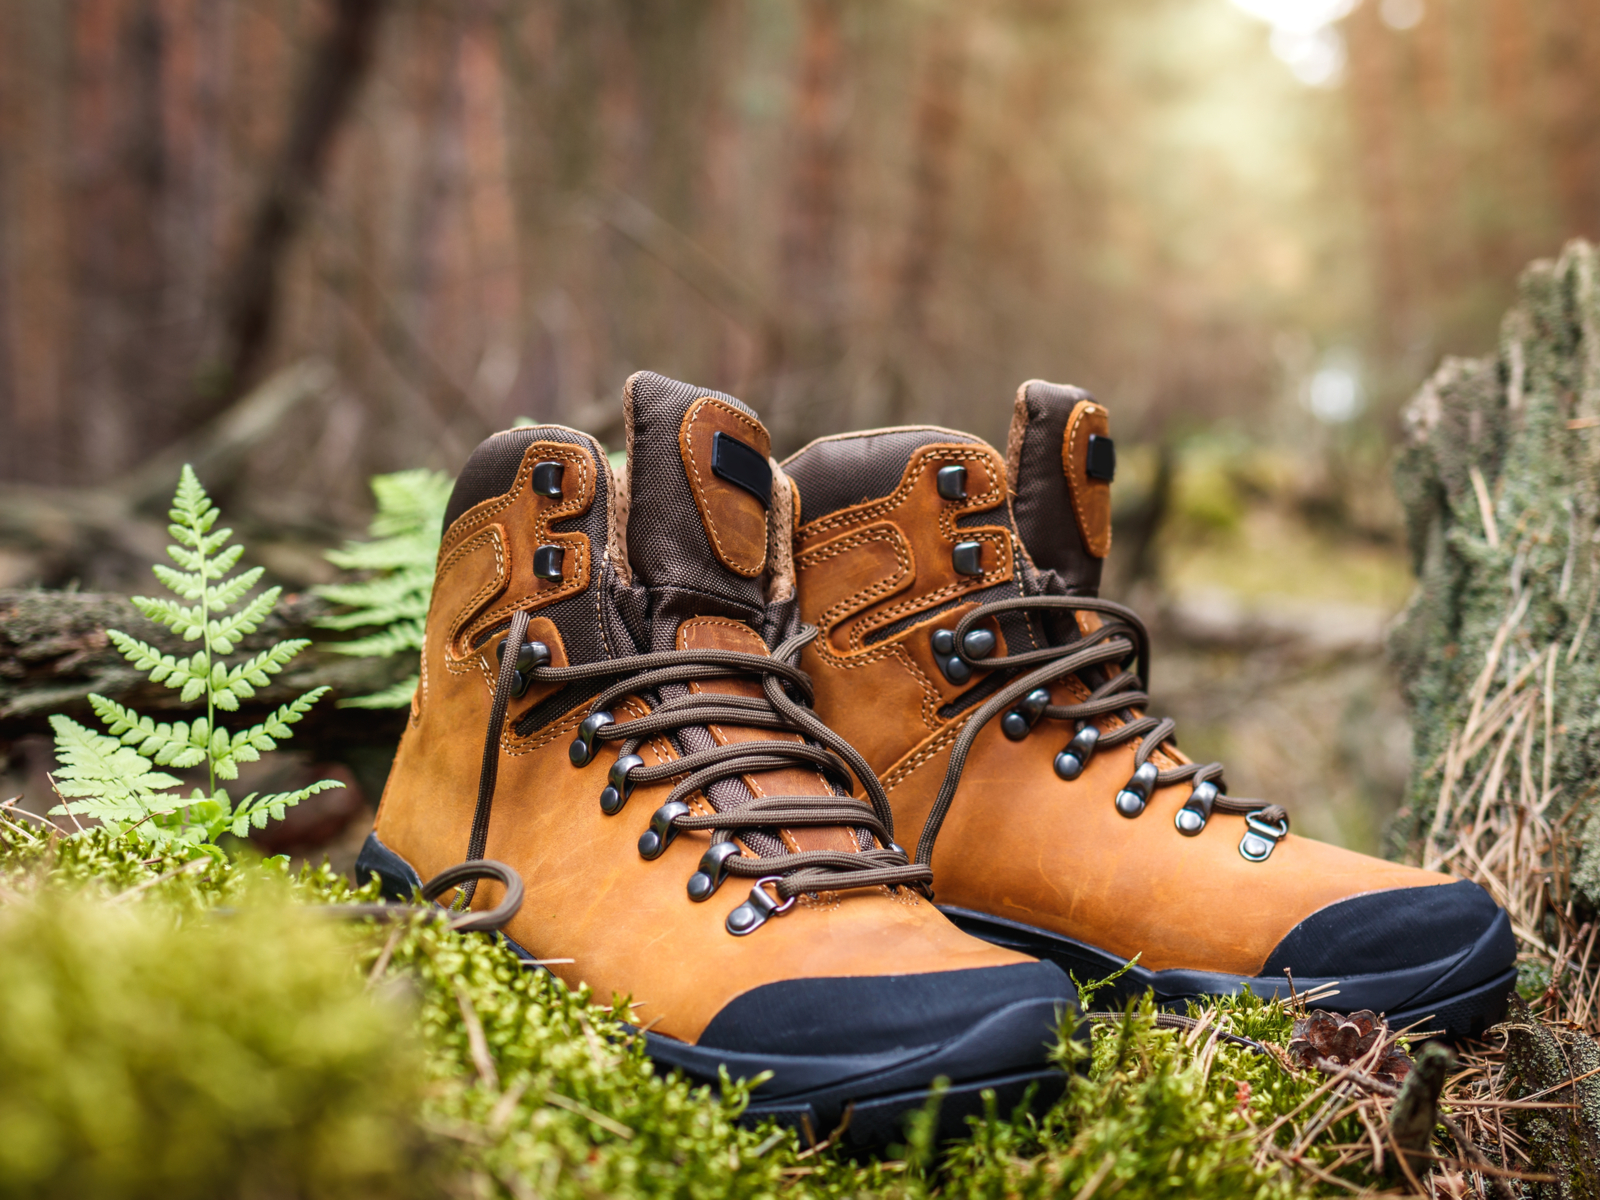 For a piece on the best waterproof boots for men, a pair of tan boots sits on some greenery